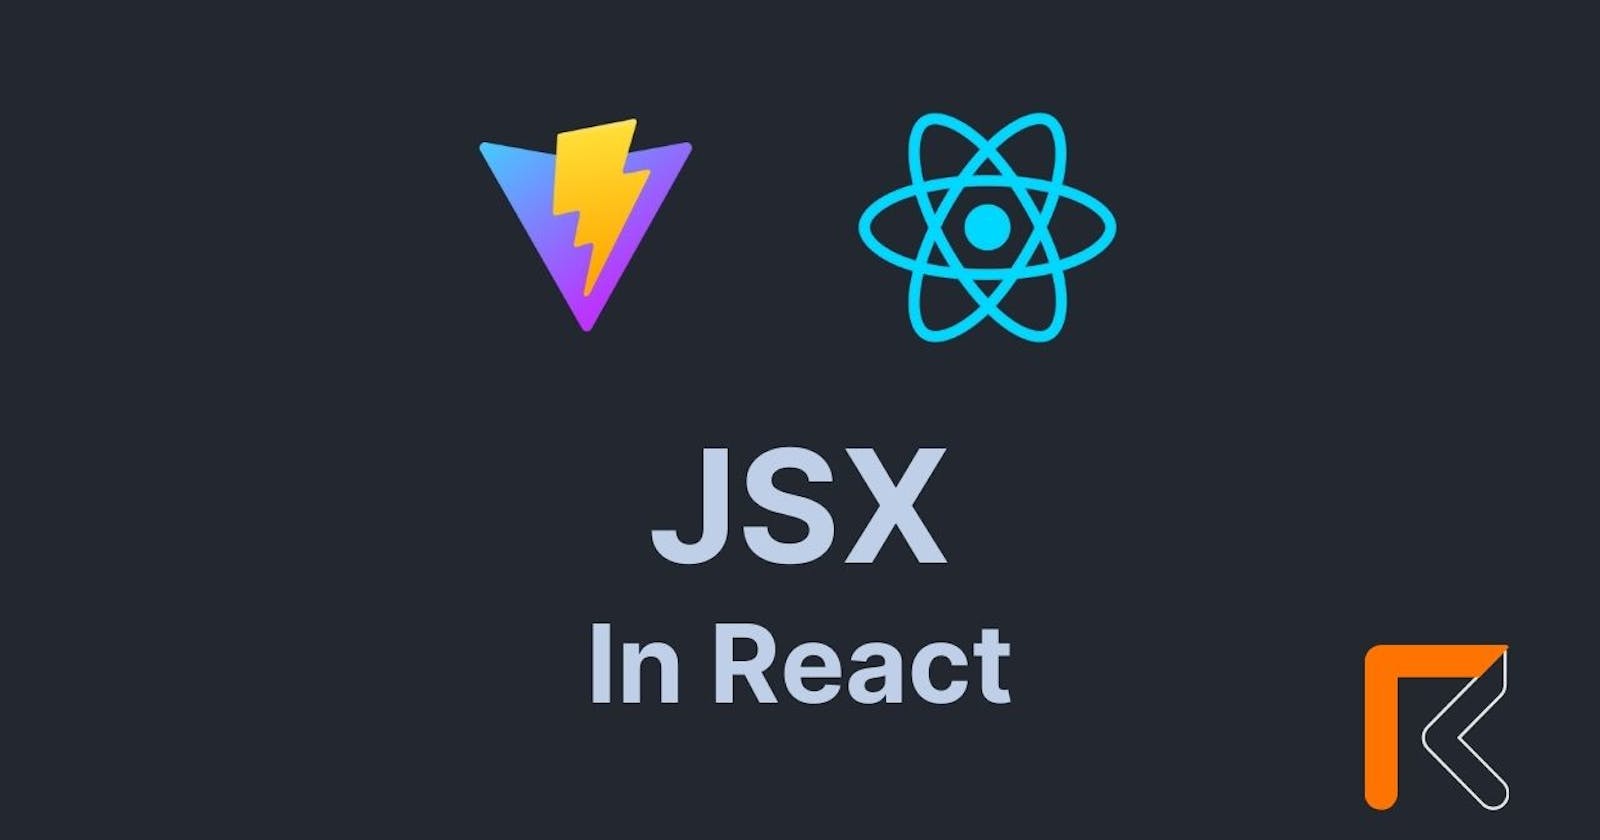 What is JSX in React